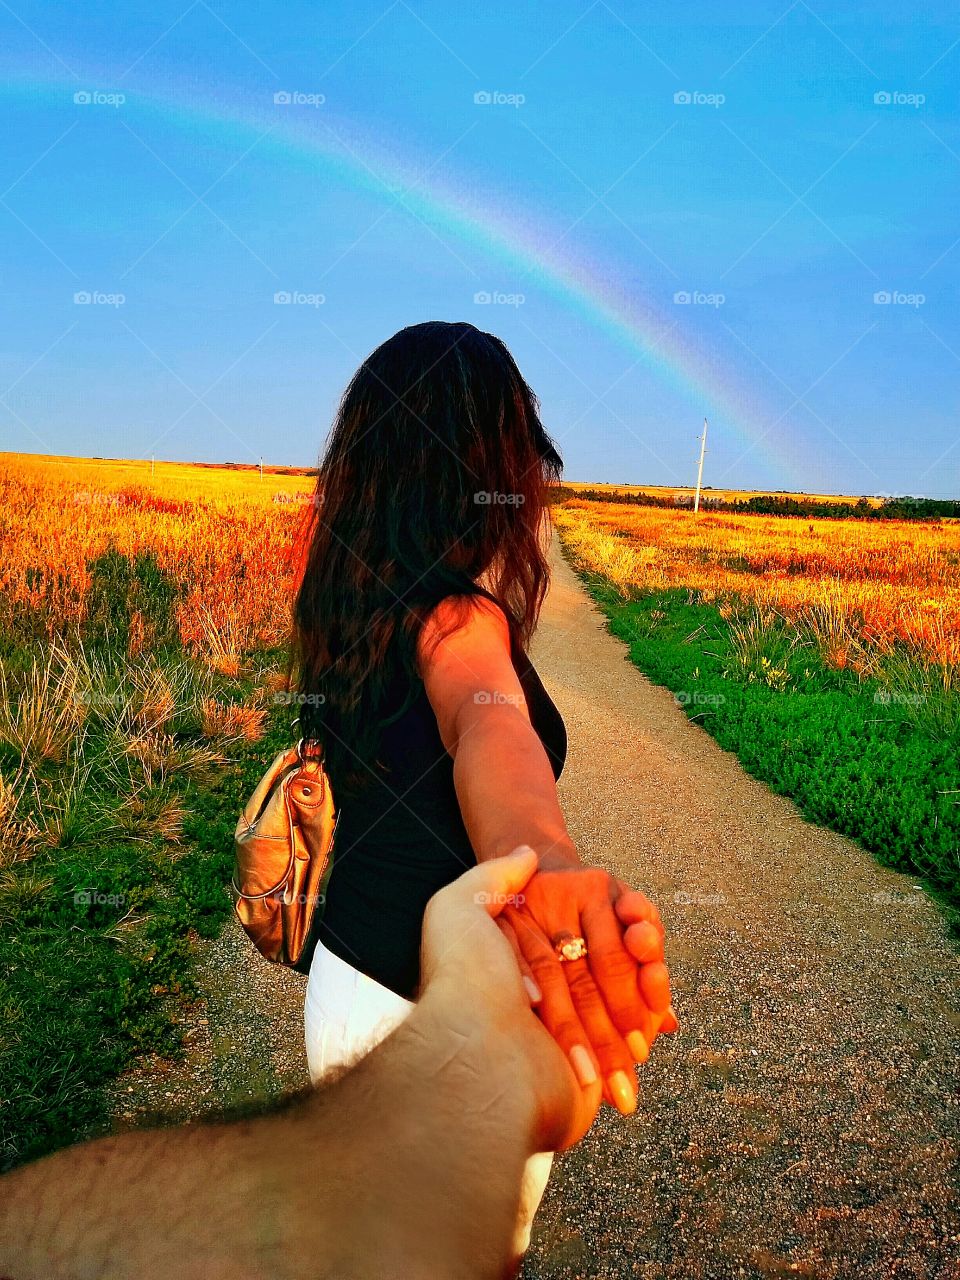 Follow me into the rainbow. After the rain comes the rainbow ...